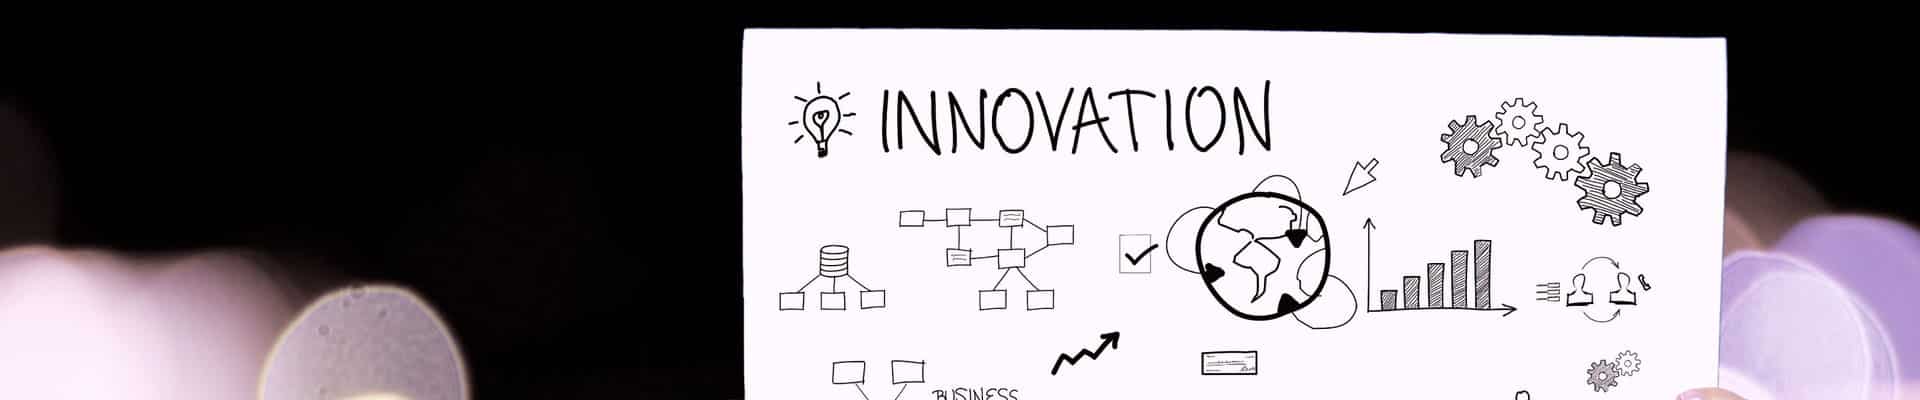 successfull innovation management process